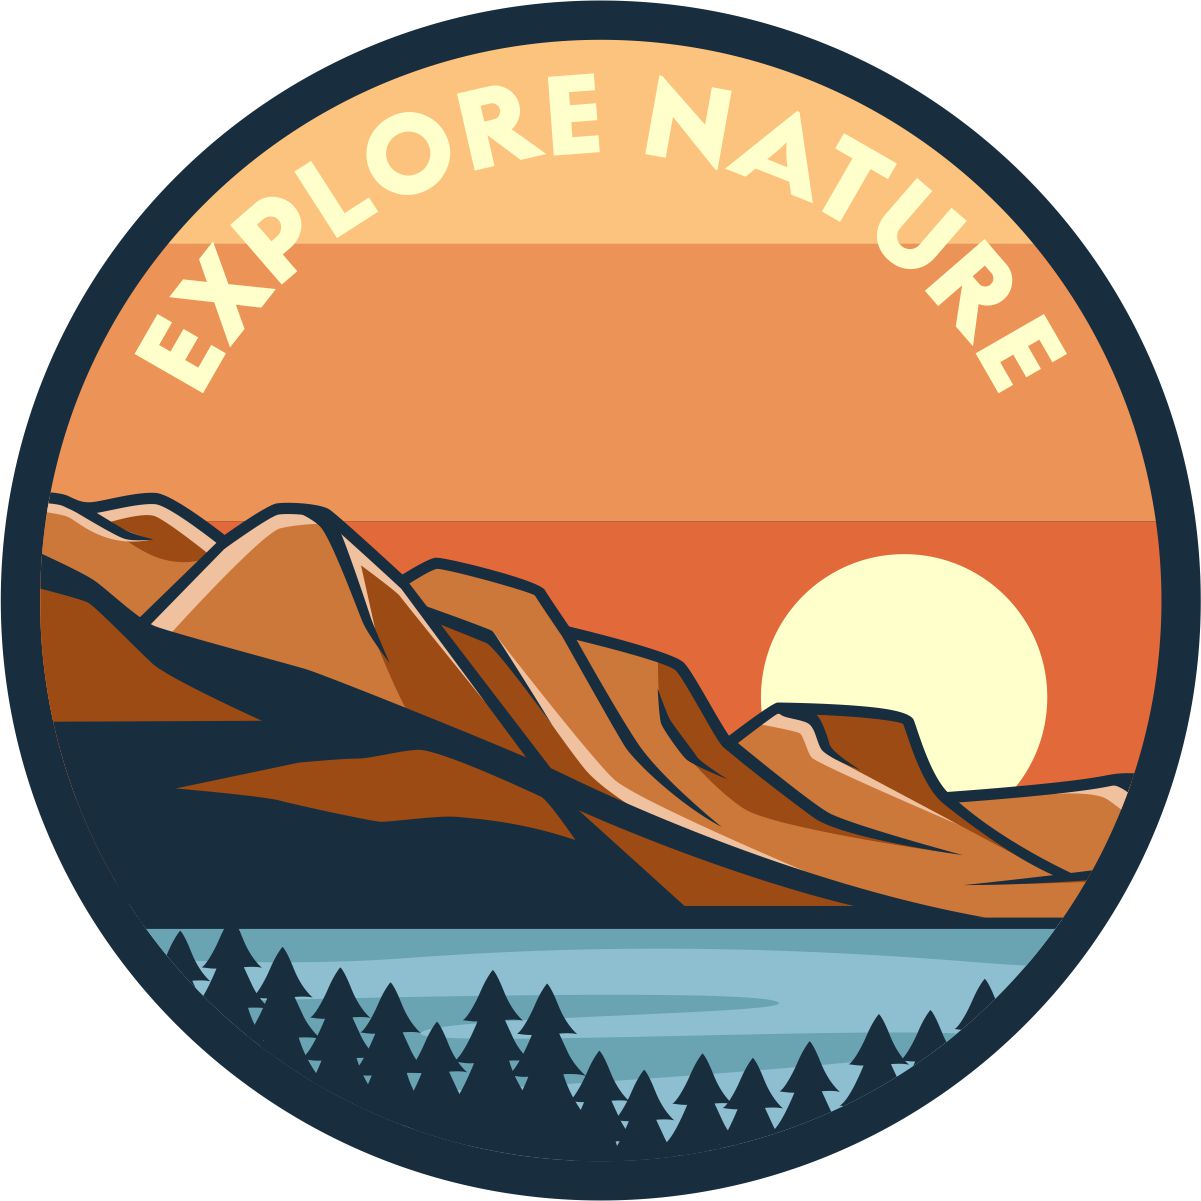 Explore nature written in text across the top of this spare tire cover design with mountains and the sunset in earth tones.